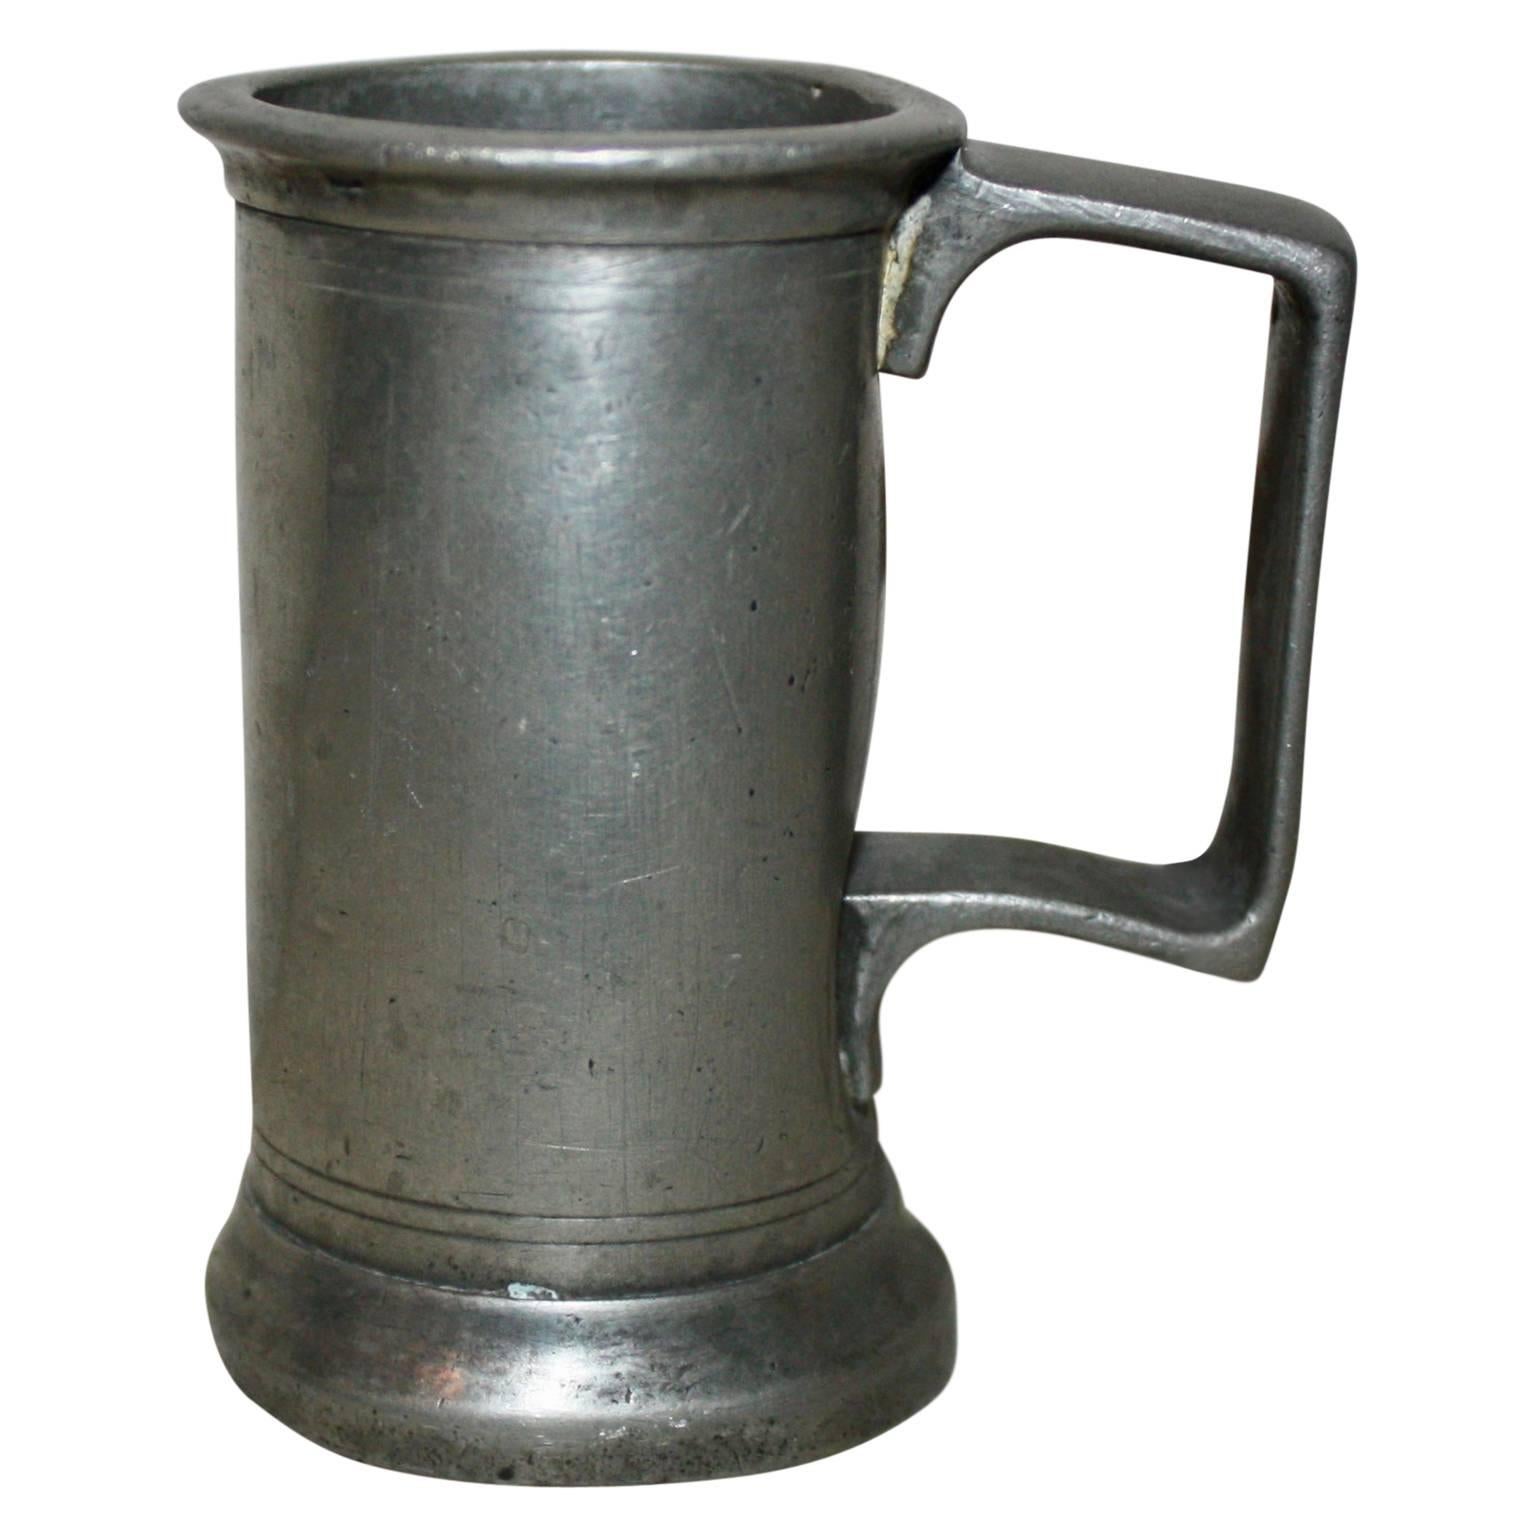 A capacity mark such as ‘pint’ or ‘quart’ is self explanatory. Such marks became a legal requirement in 1836 in England. The presence of such a mark does not mean the item is post-1836 as vessels made before then which remained in use after 1836